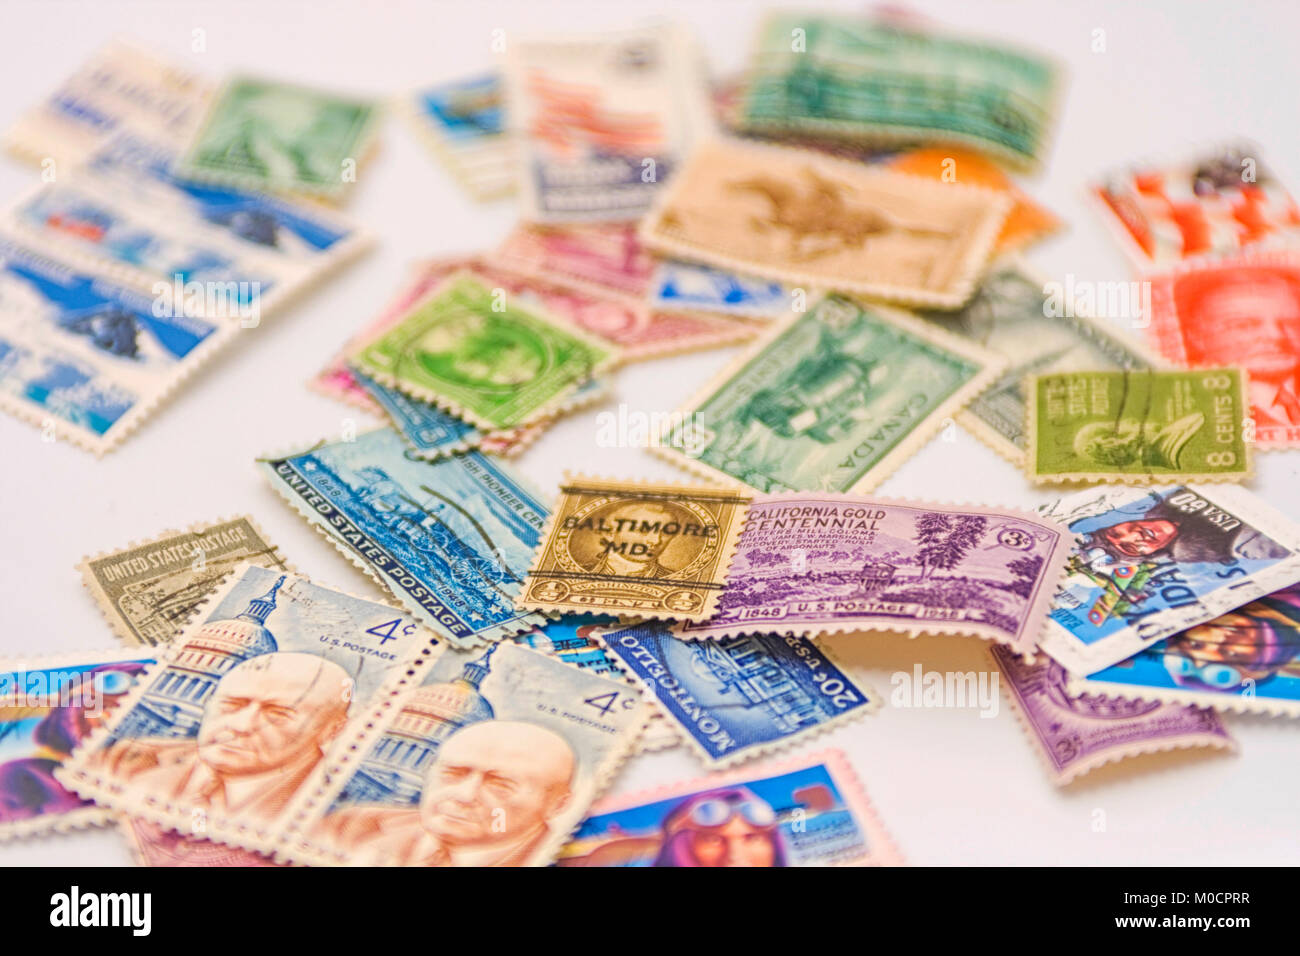 Bunch of old american postage stamps Stock Photo